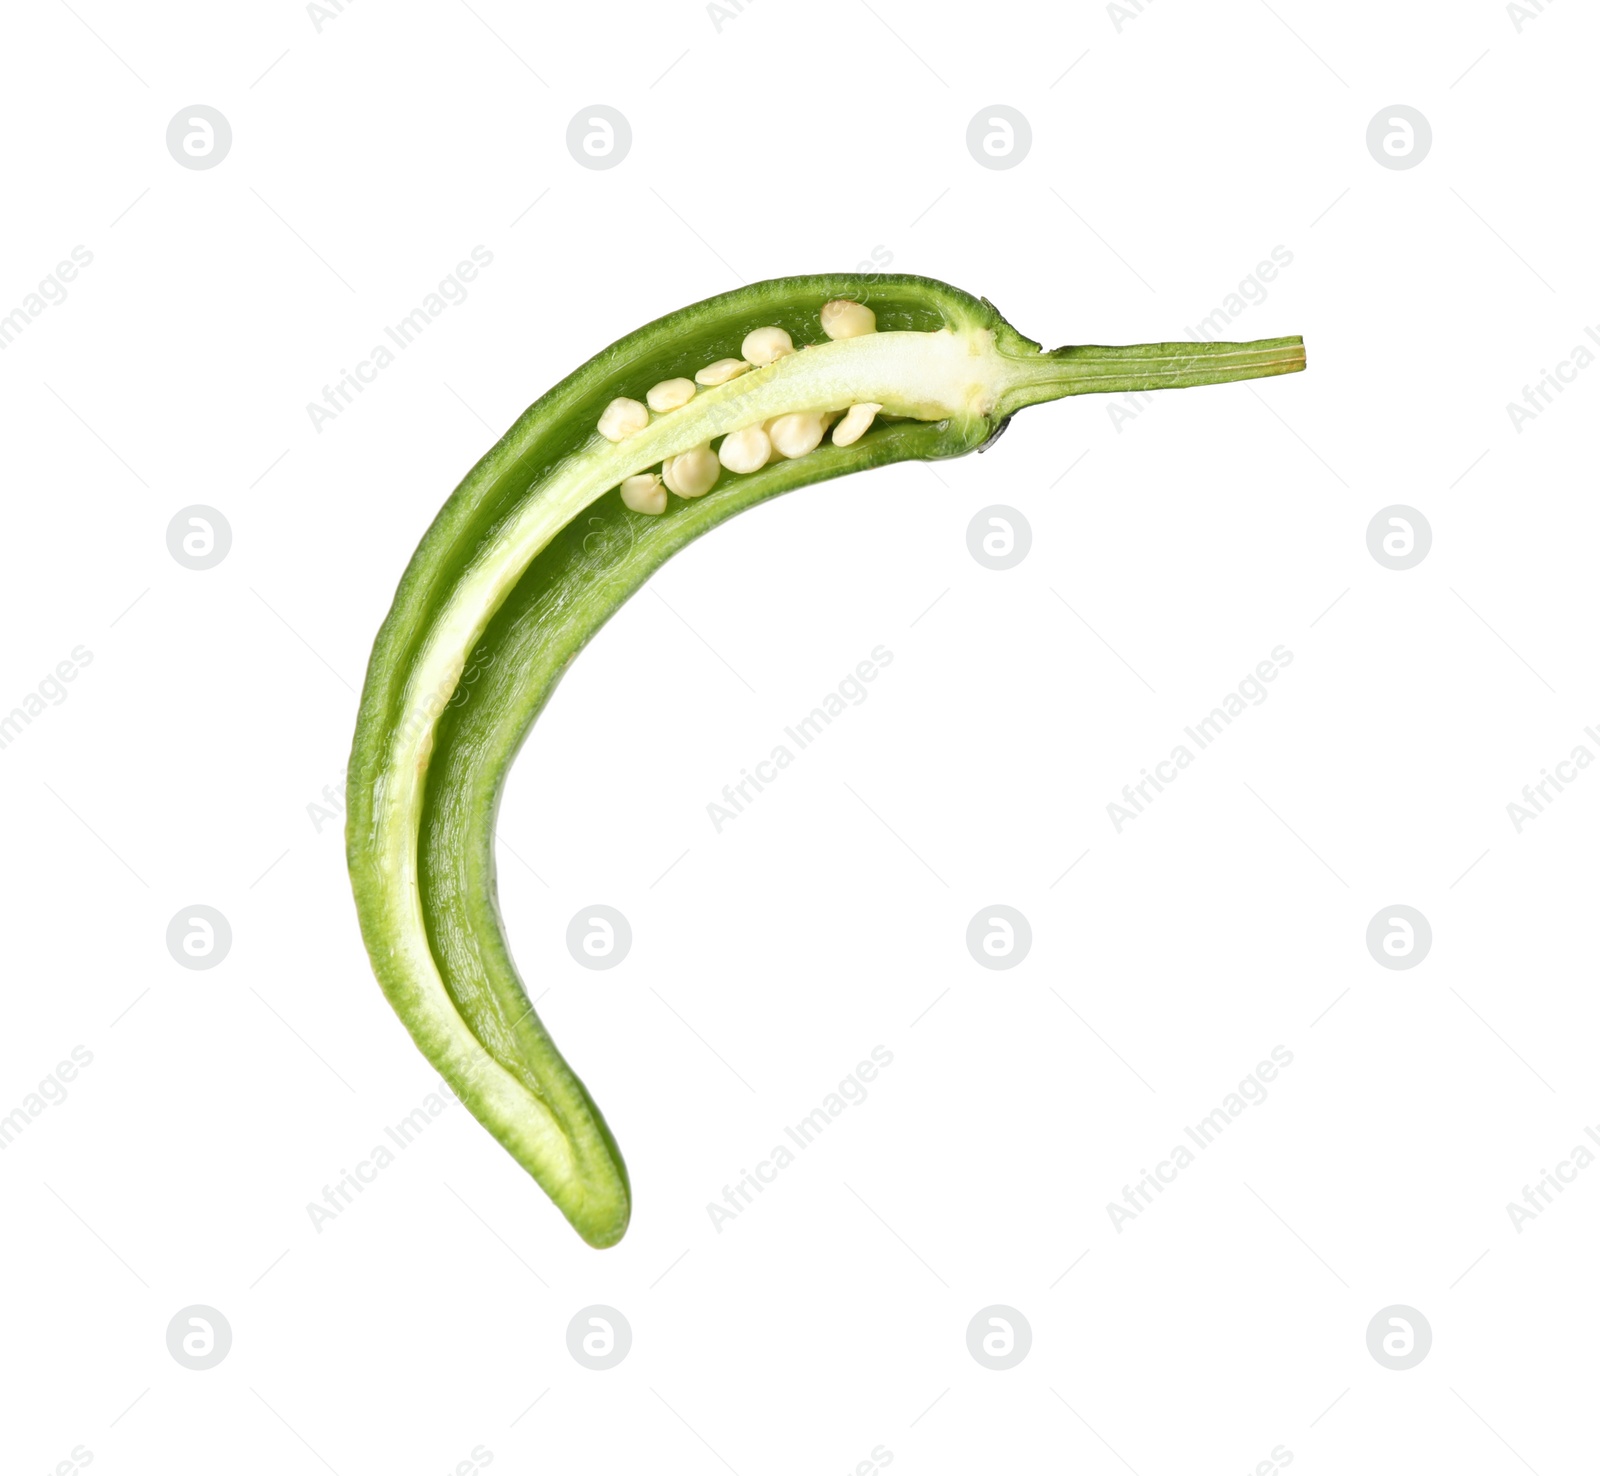 Photo of Half of green hot chili pepper isolated on white